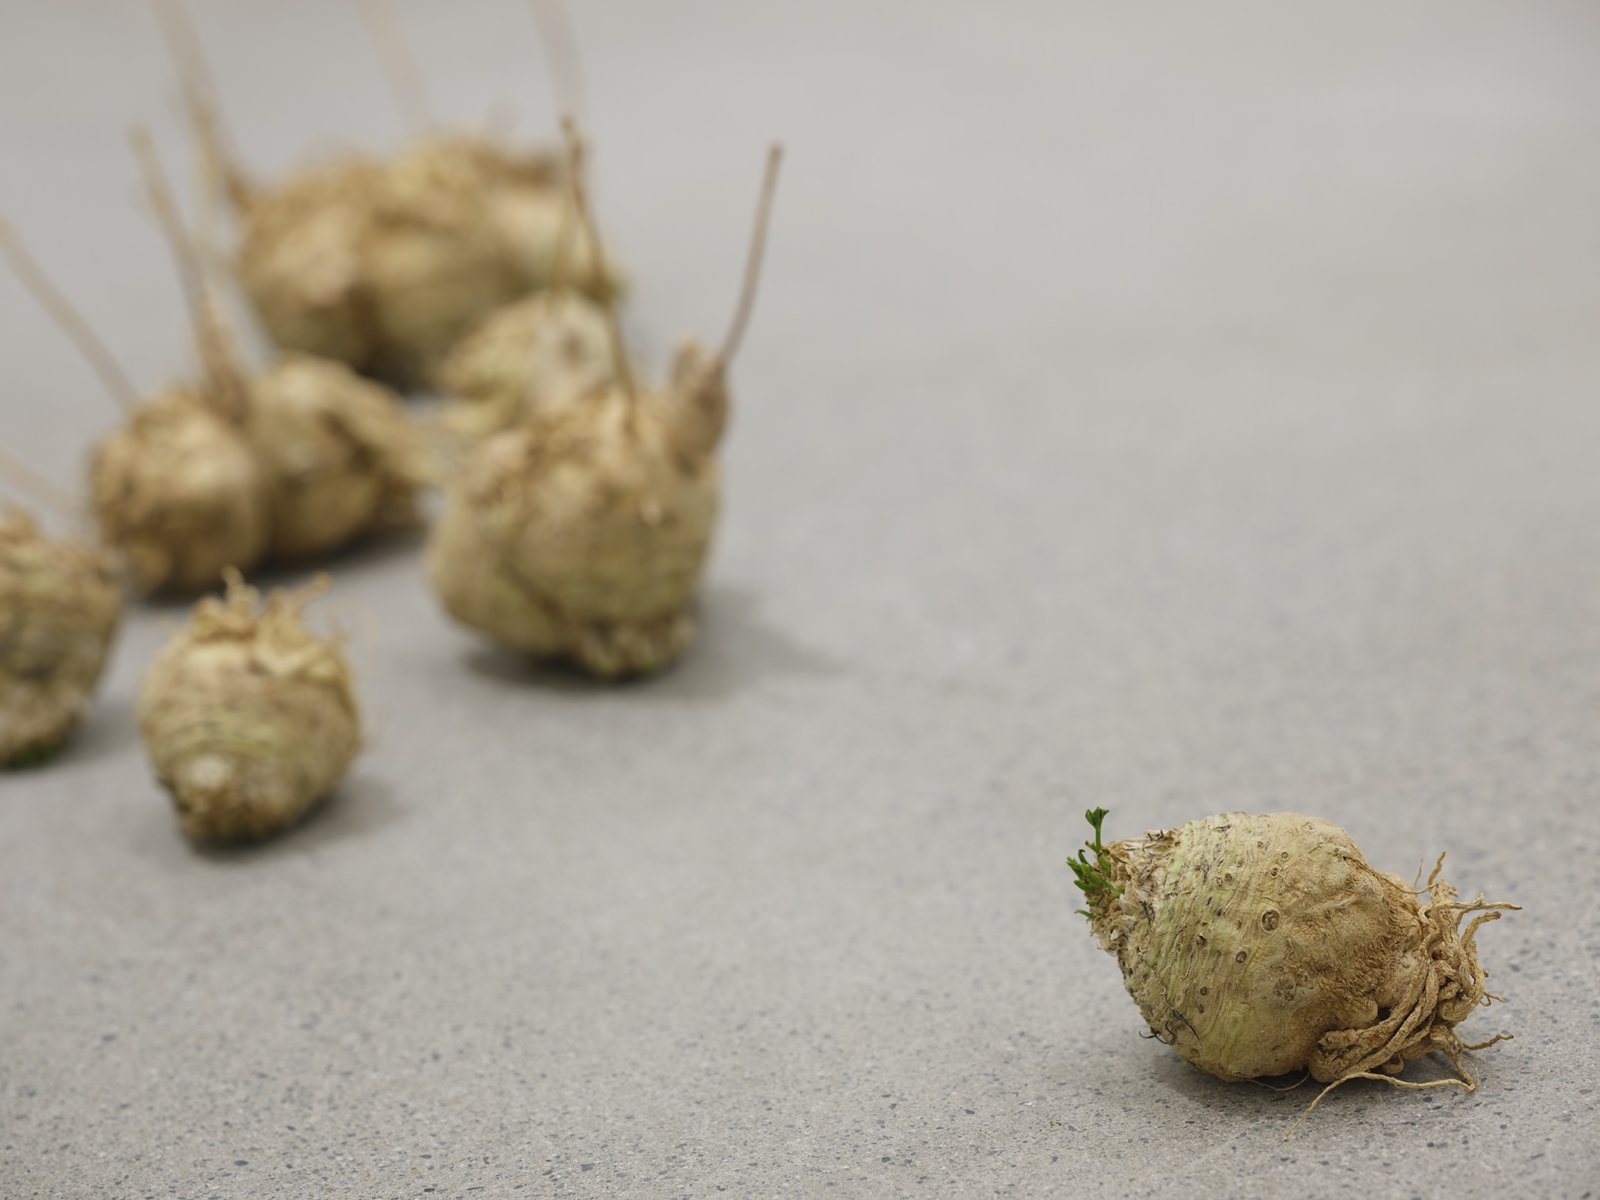 ​Rochelle Goldberg, Cosmic Footing (detail), 2019, celeriac, ginger, cast aluminum matches, cast bronze matches, installation dimensions variable by Rochelle Goldberg